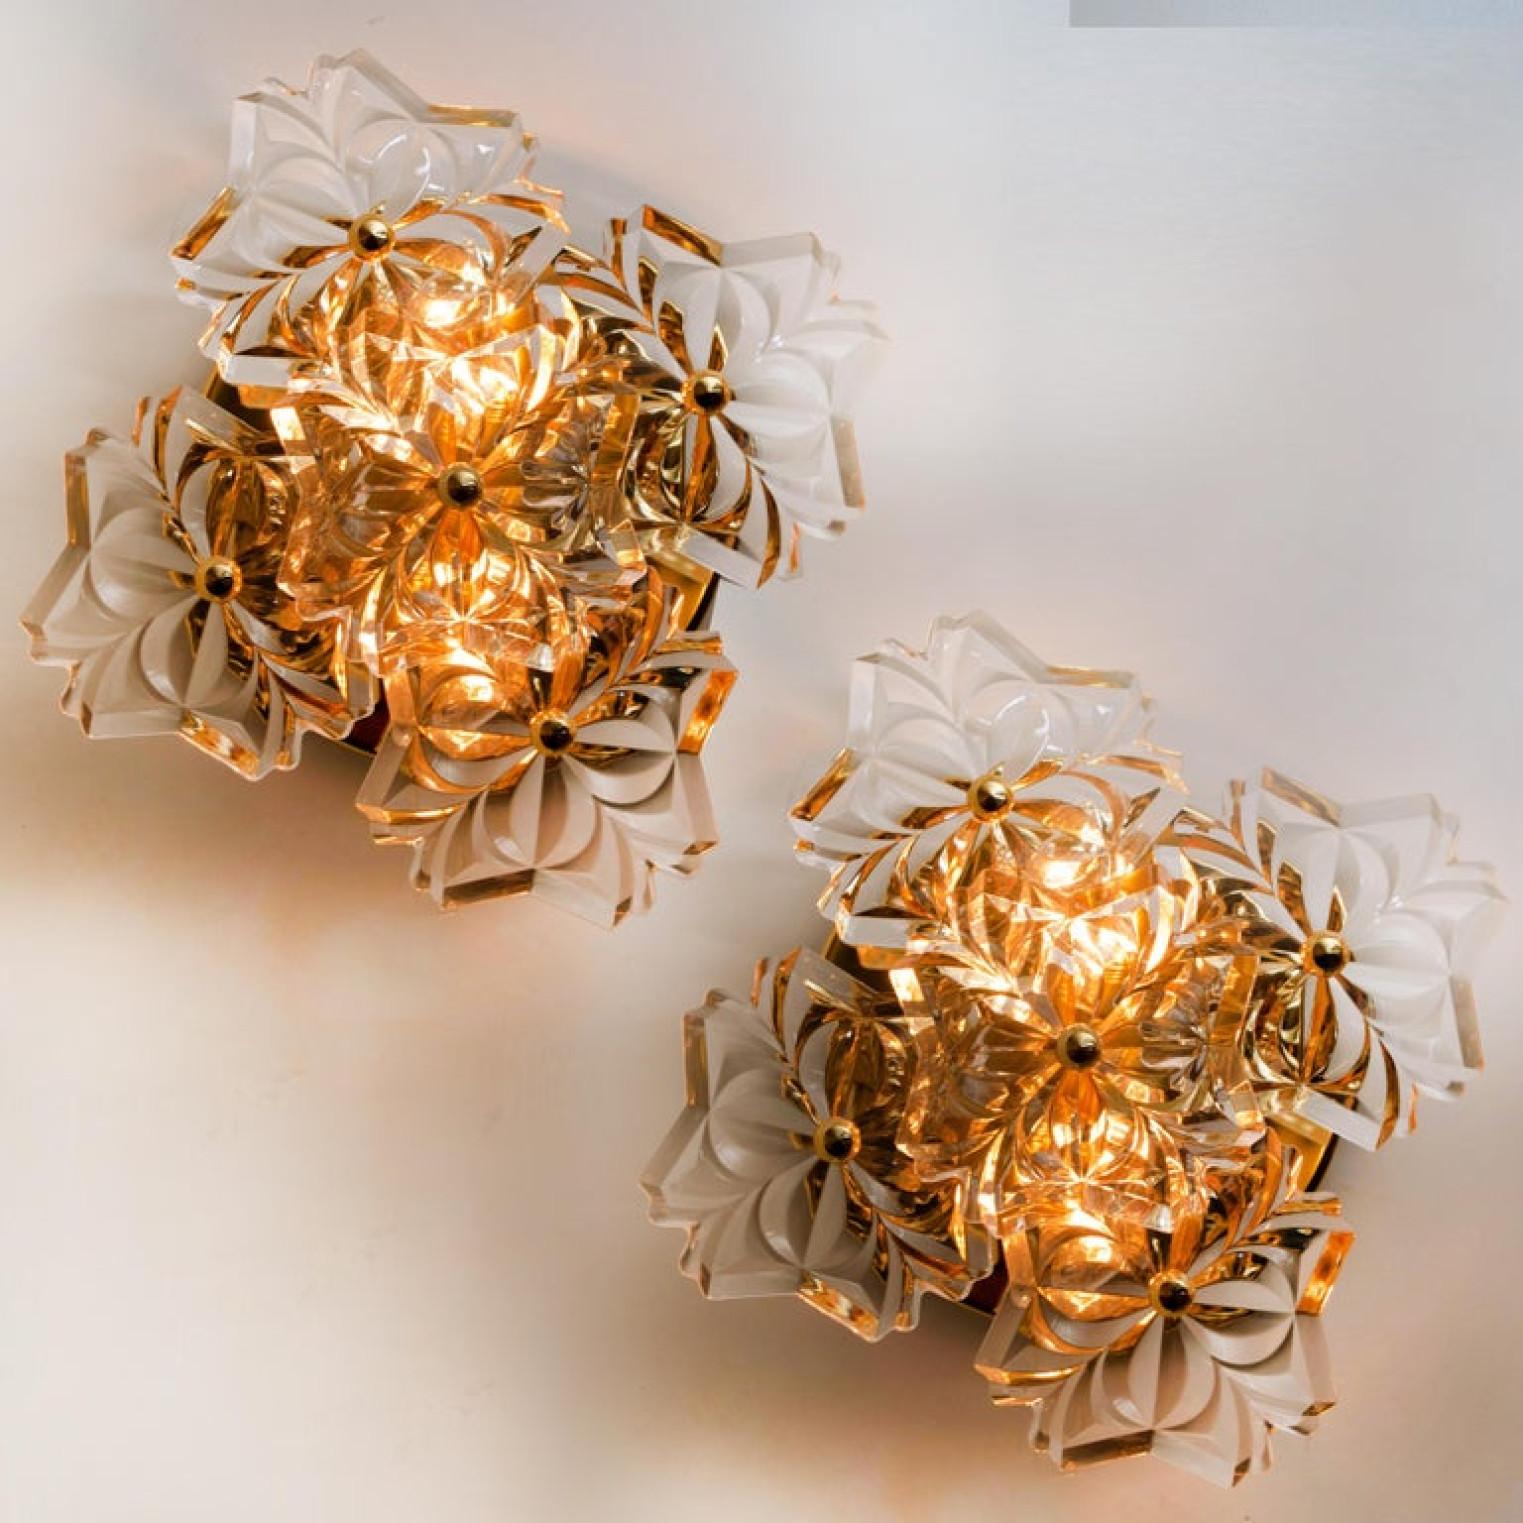 Pair of Midcentury Brass Floral Wall Lights by Hillebrand, 1970s For Sale 3